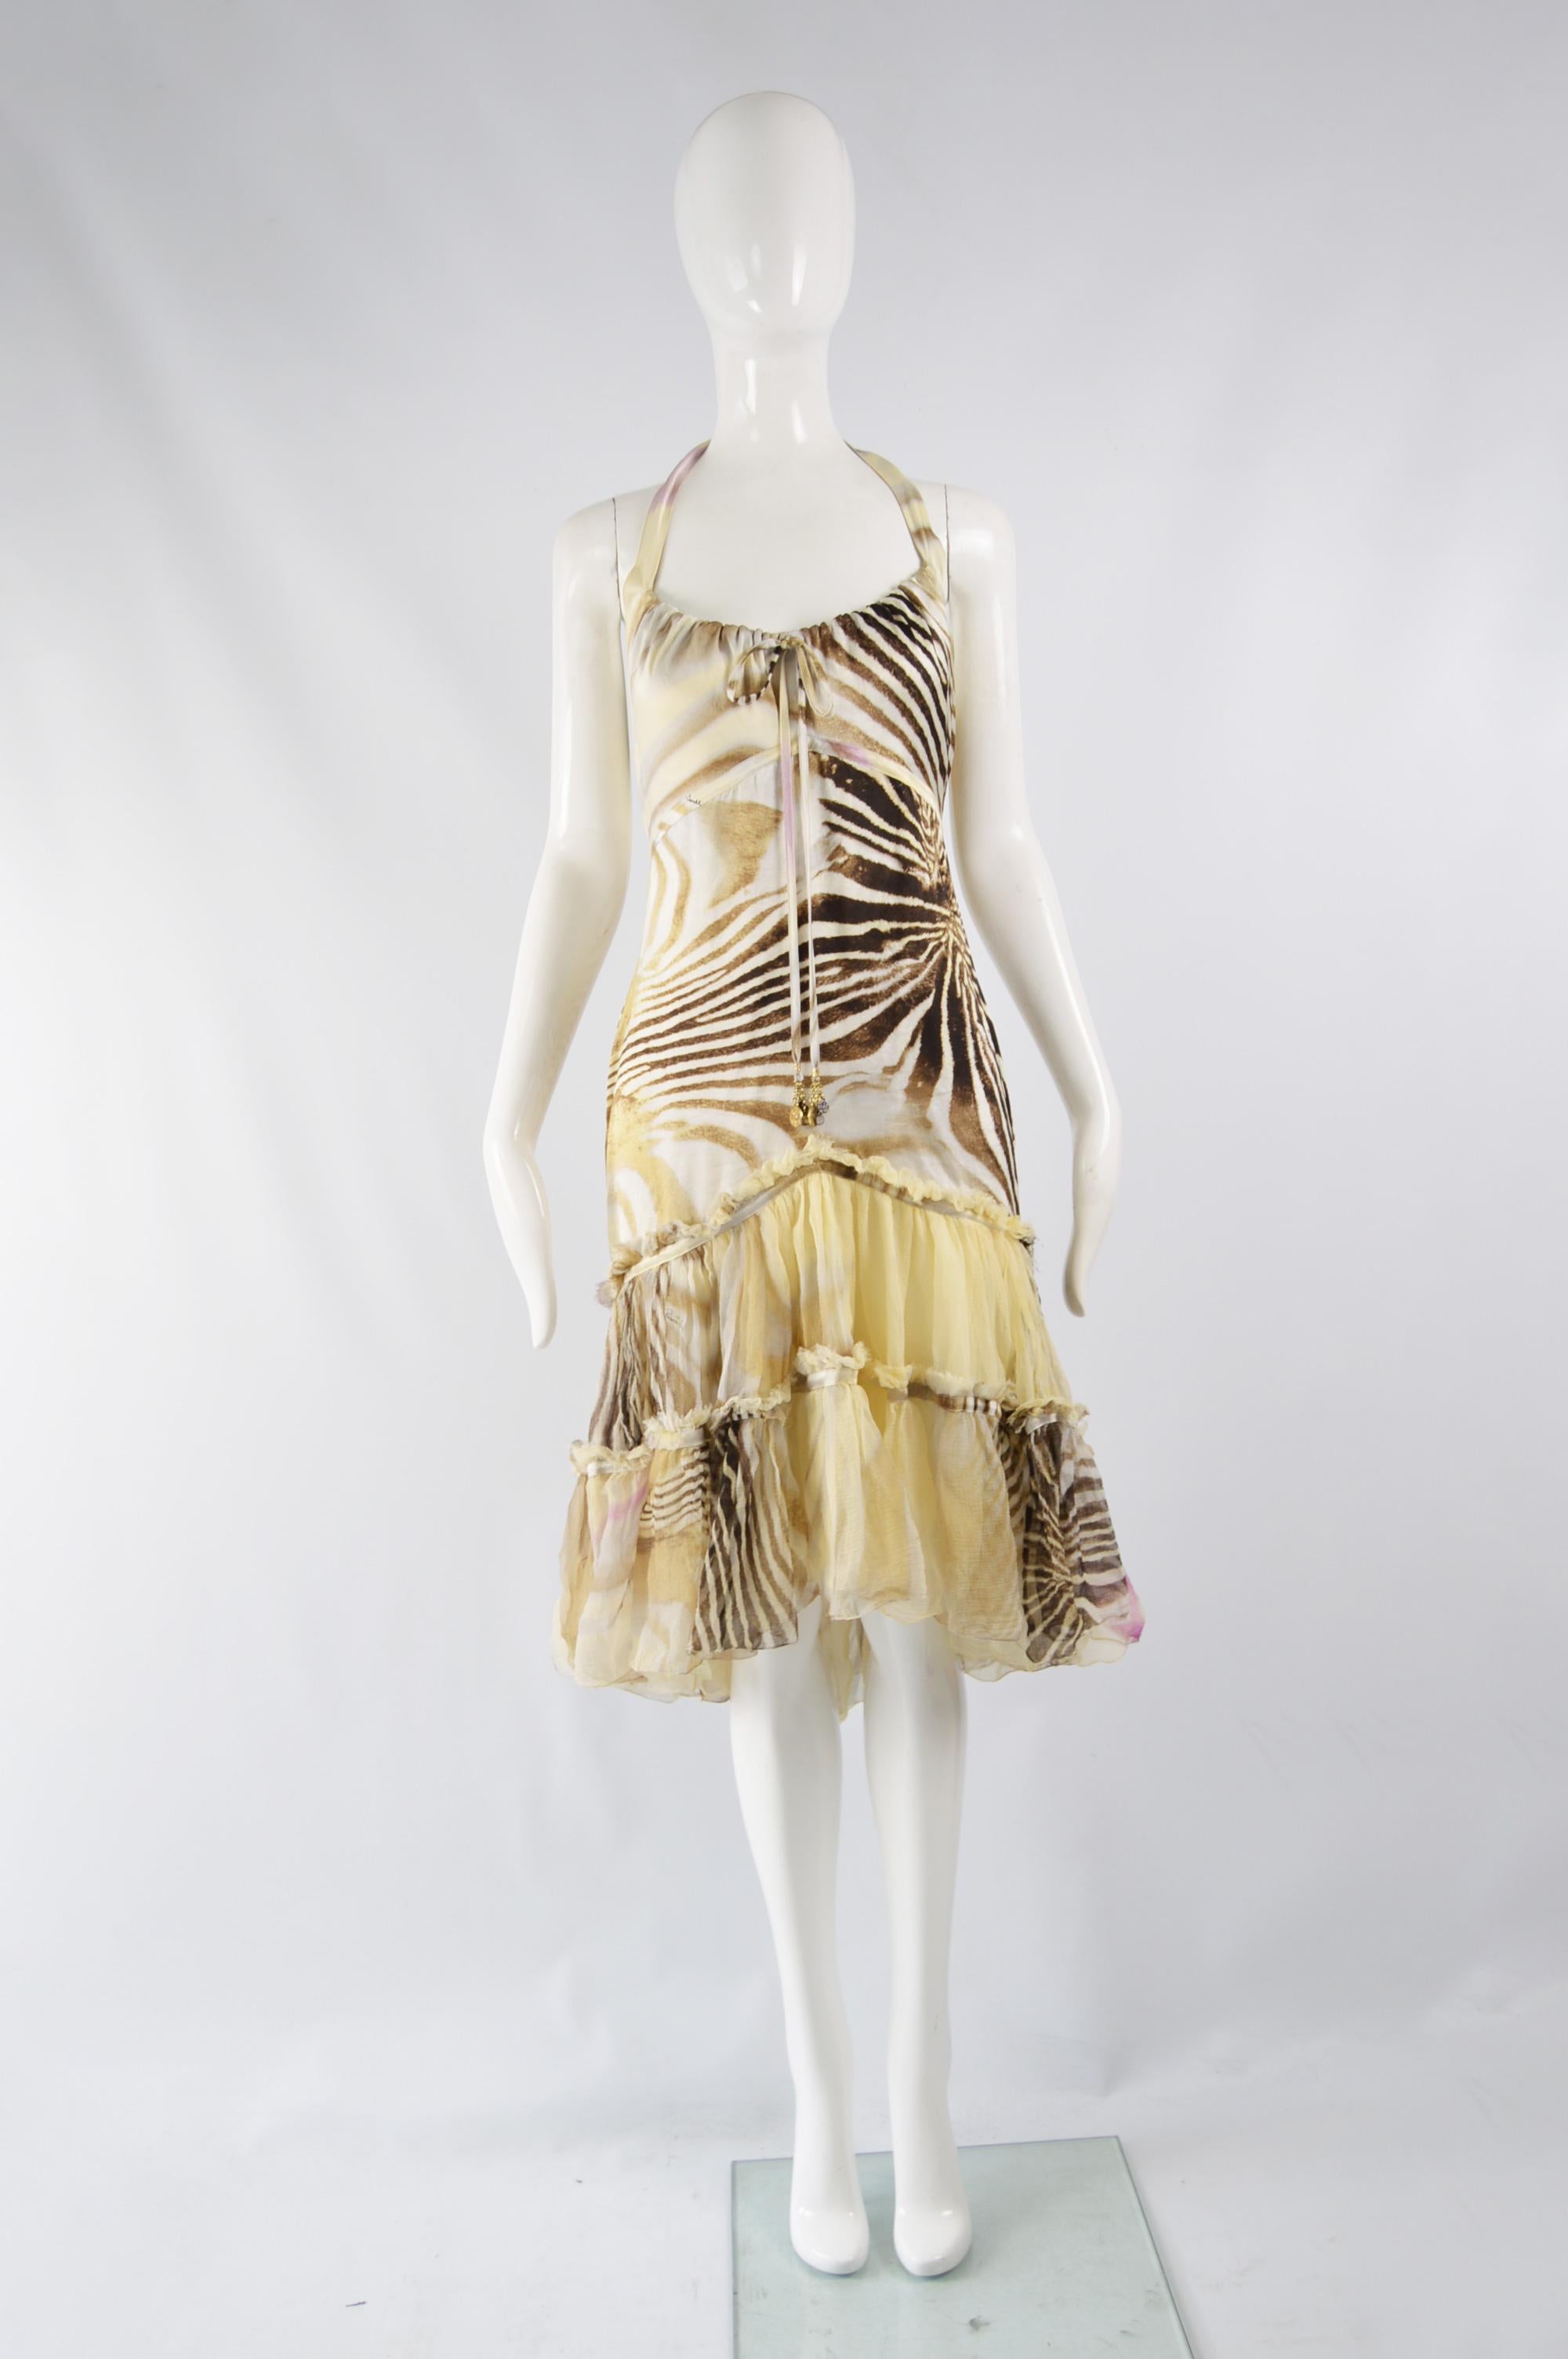 A stunning Roberto Cavalli dress in an animal printed silk satin with a tiered silk chiffon skirt. It ties at the back of the neck with a halter neck. Perfect for the day or evening. 

Size: Marked M but better fits a UK 10/ US 6/ EU 38. Please